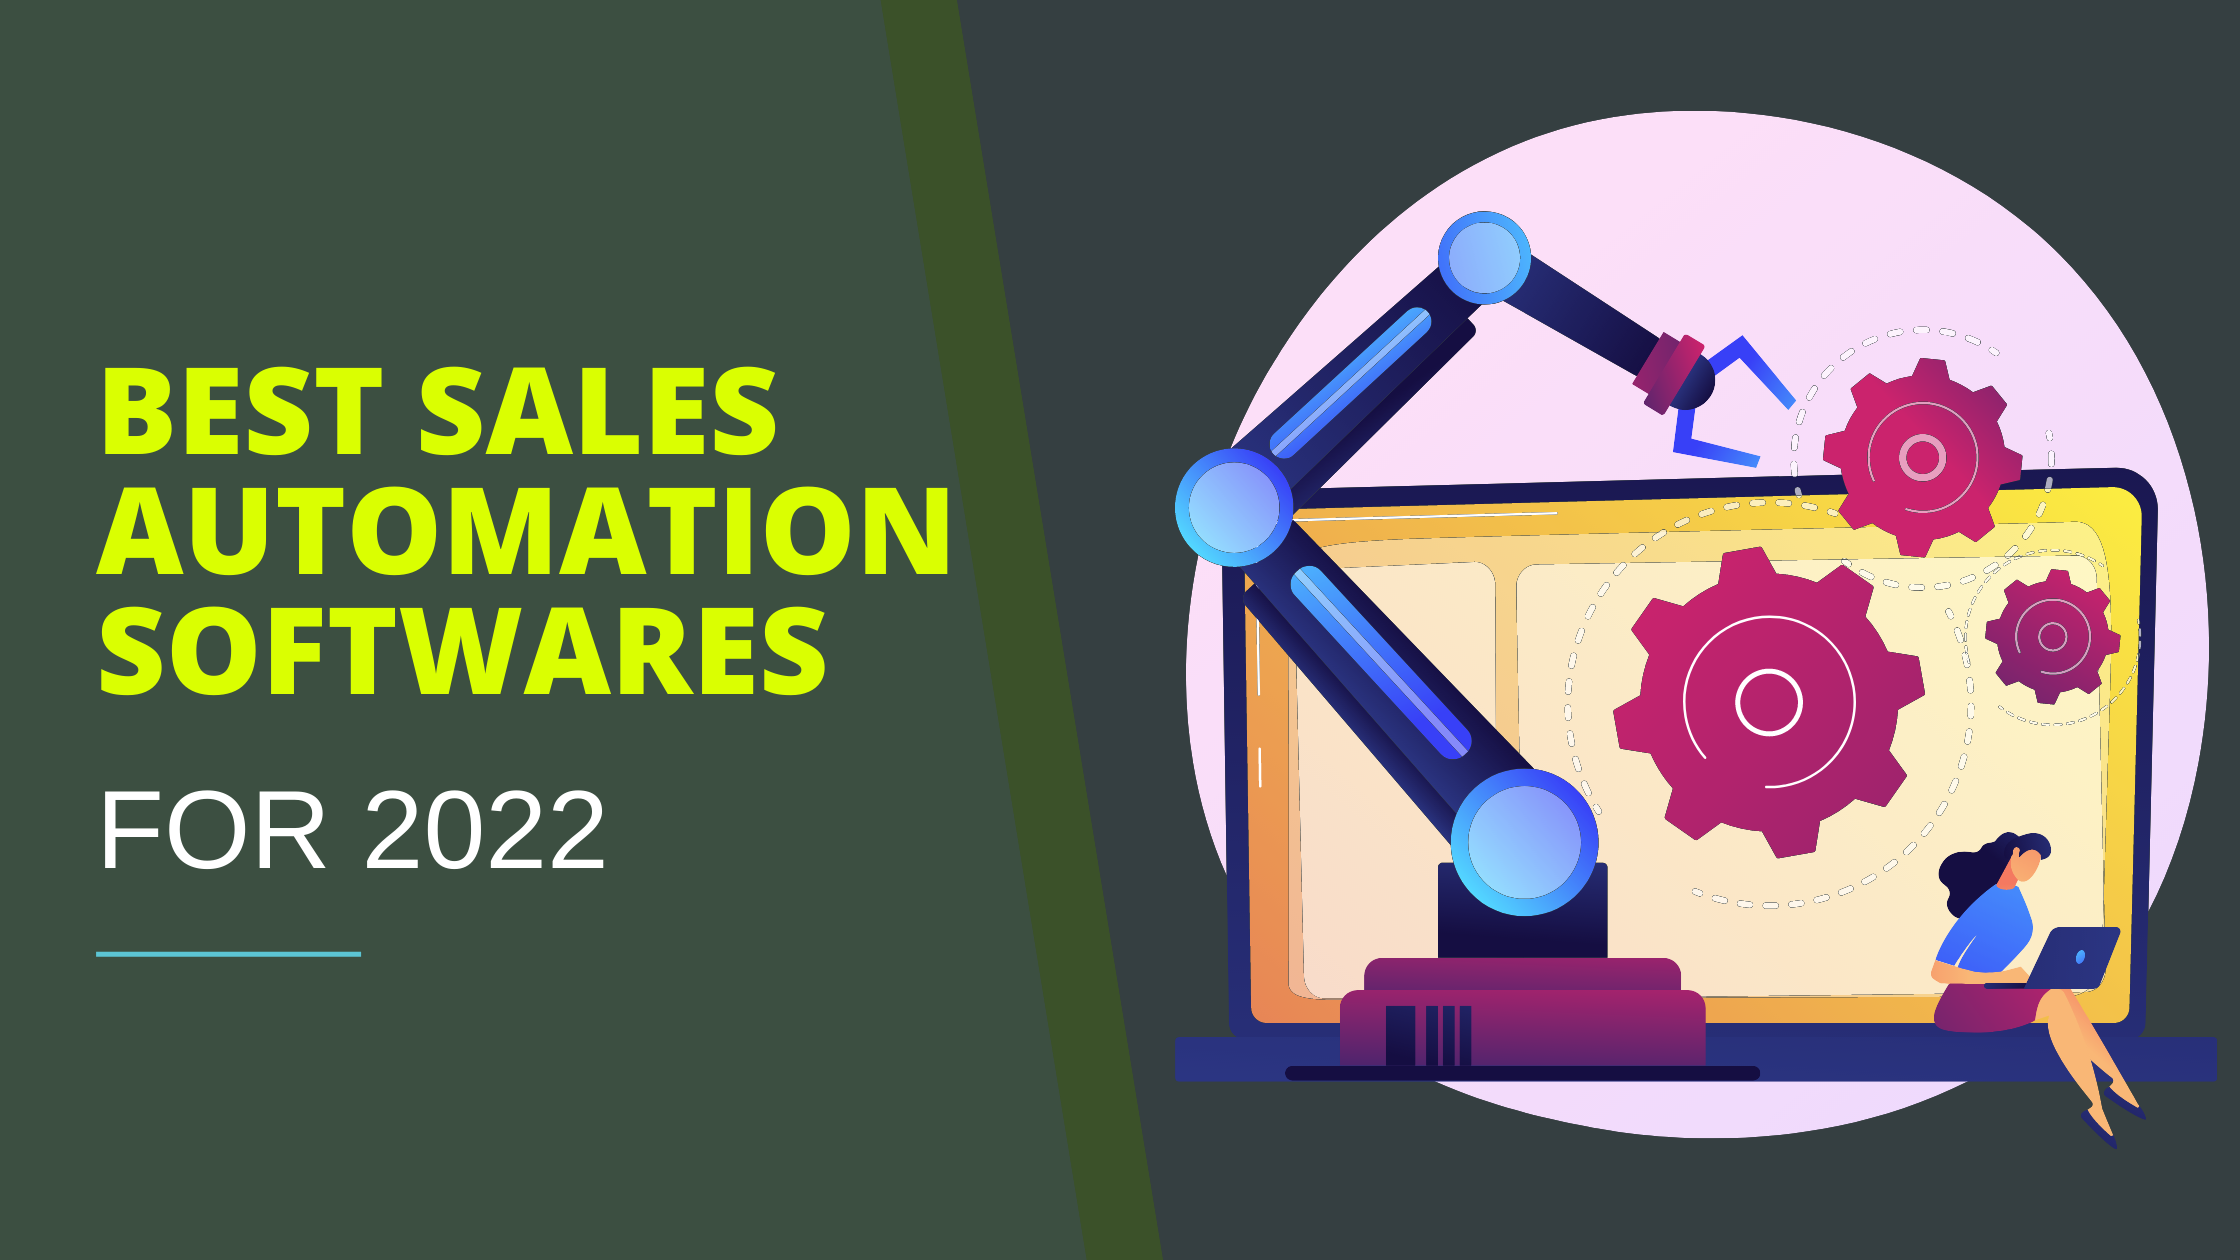 Best Sales Automation Softwares for 2022